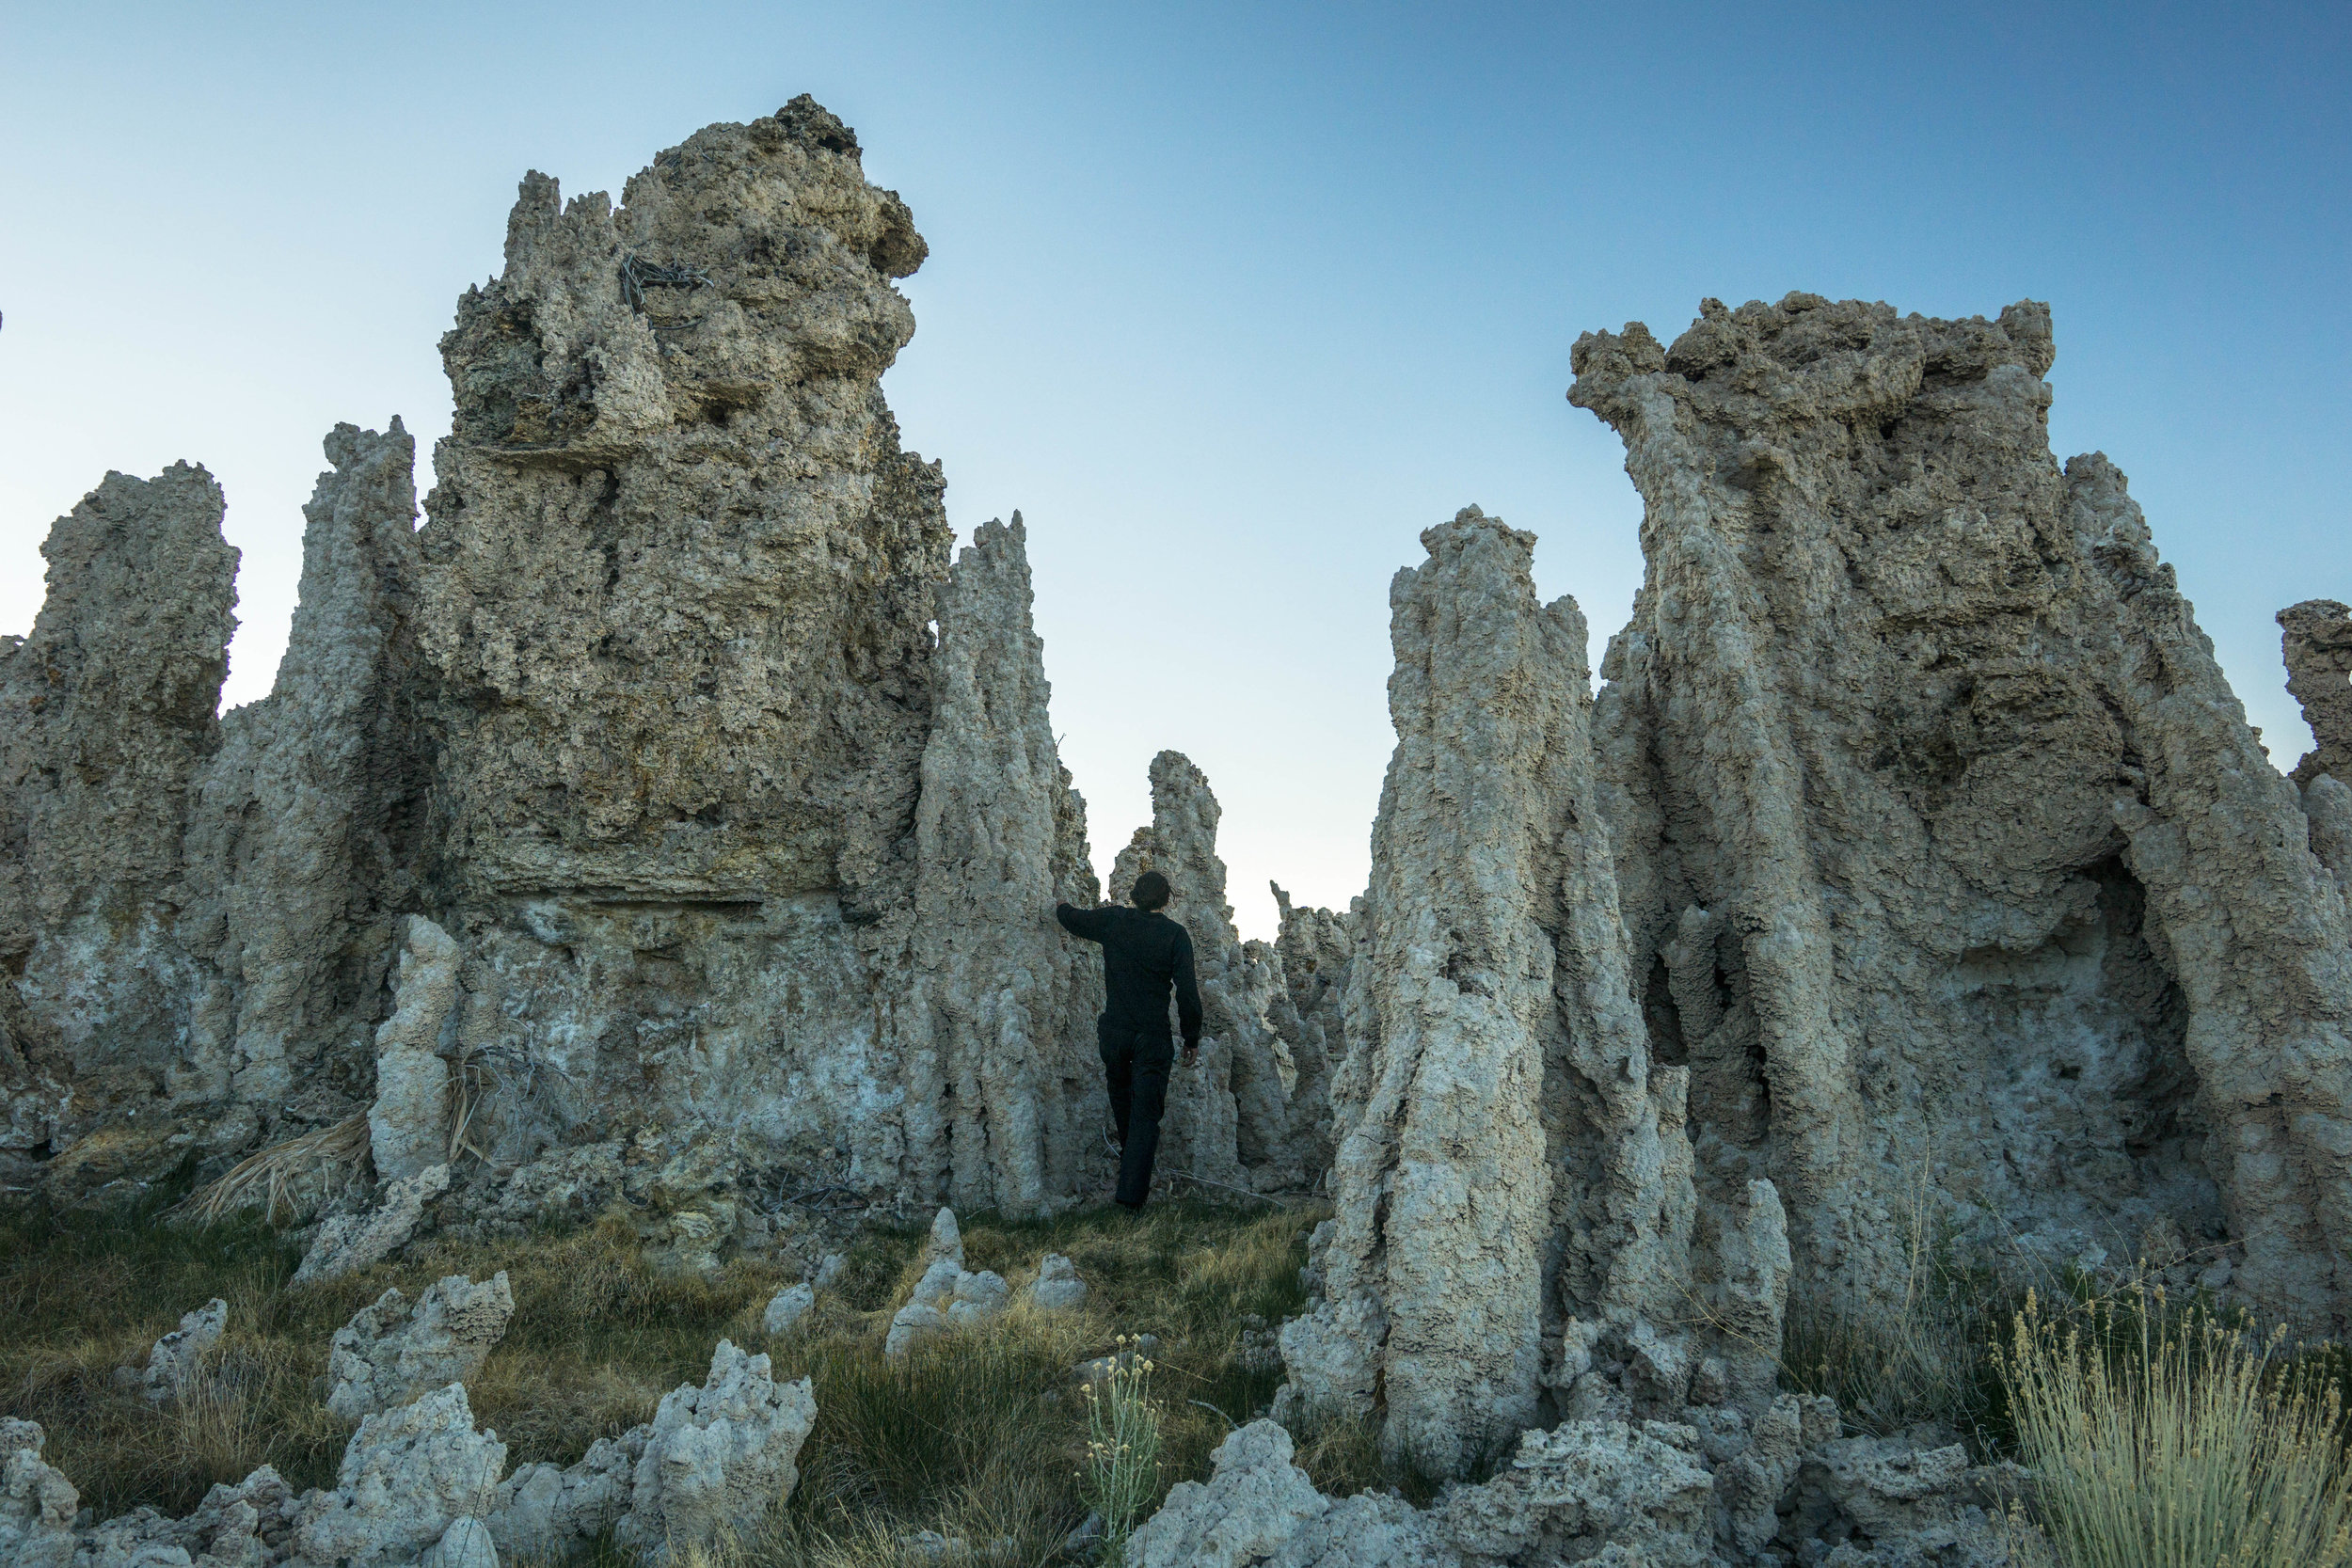 This alien landscape is dotted with tufa towers, formed under water when the lake level was higher.